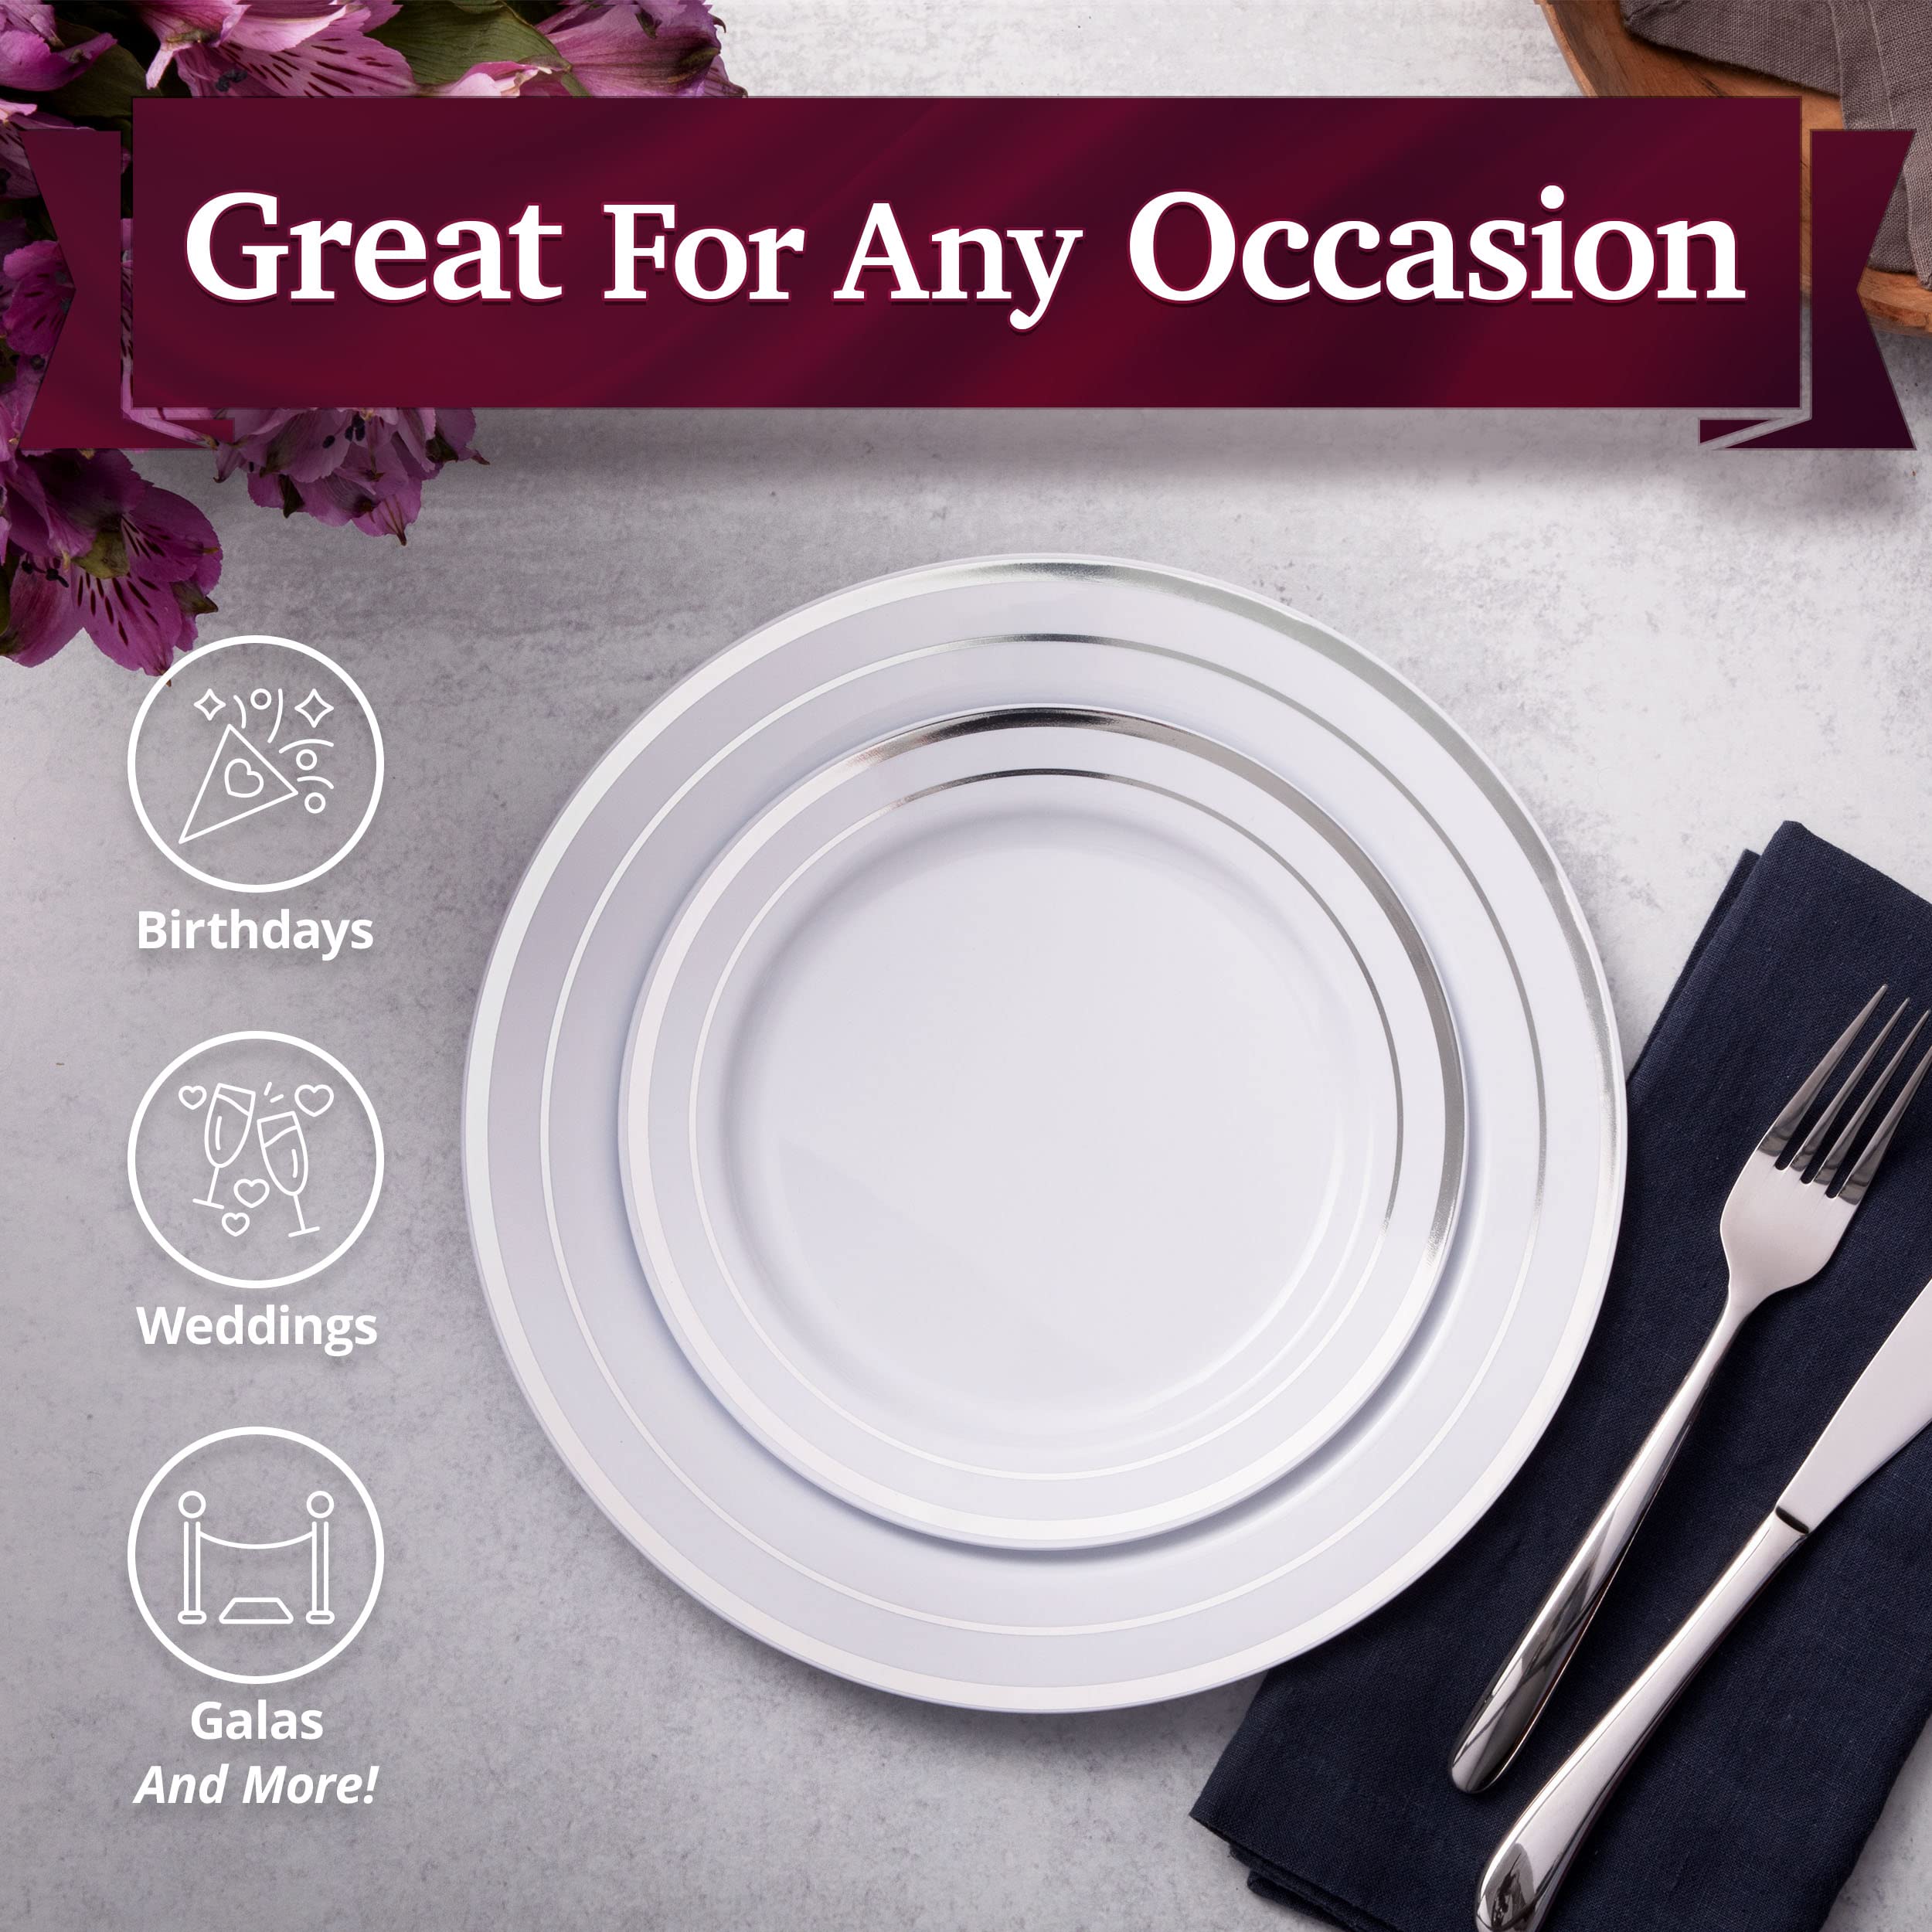 Aya's 60 Silver Plastic Plates Disposable Heavy Duty Premium Plastic Plates, 30 Plastic Dinner Plates + 30 Dessert Appetizer Plates for Weddings, Fancy Disposable Plates for Party White Plastic Plates  - Good